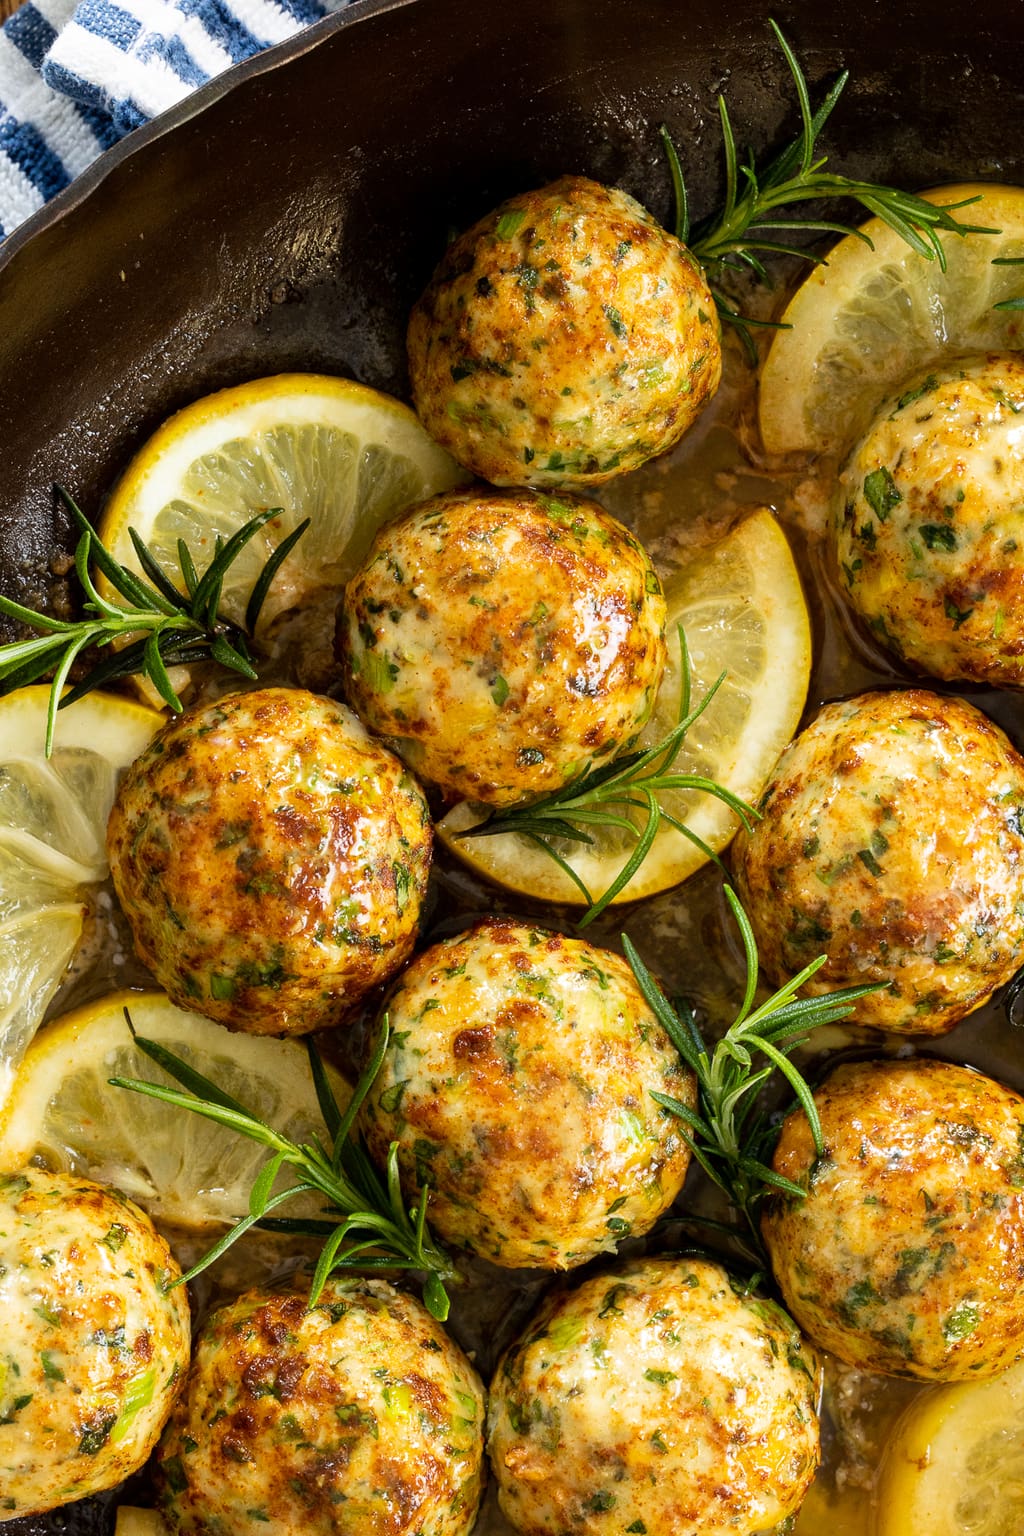 Extreme closeup photo of a batch of Fresh Herb Chicken Meatballs garnished with sprigs of fresh rosemary leaves and lemon wedges.